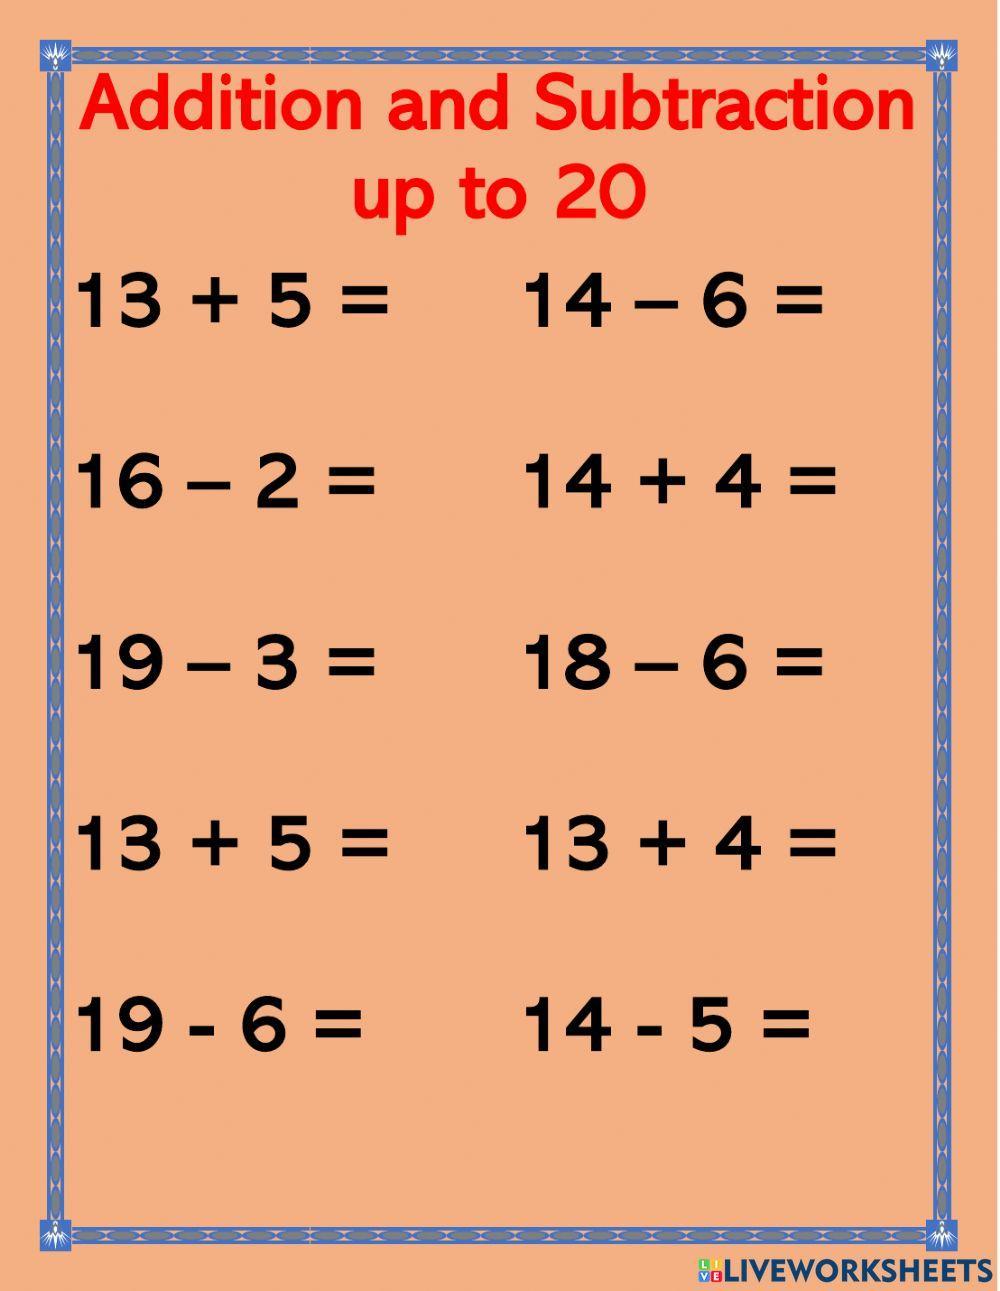 Addition and Subtraction to 20 Set 7